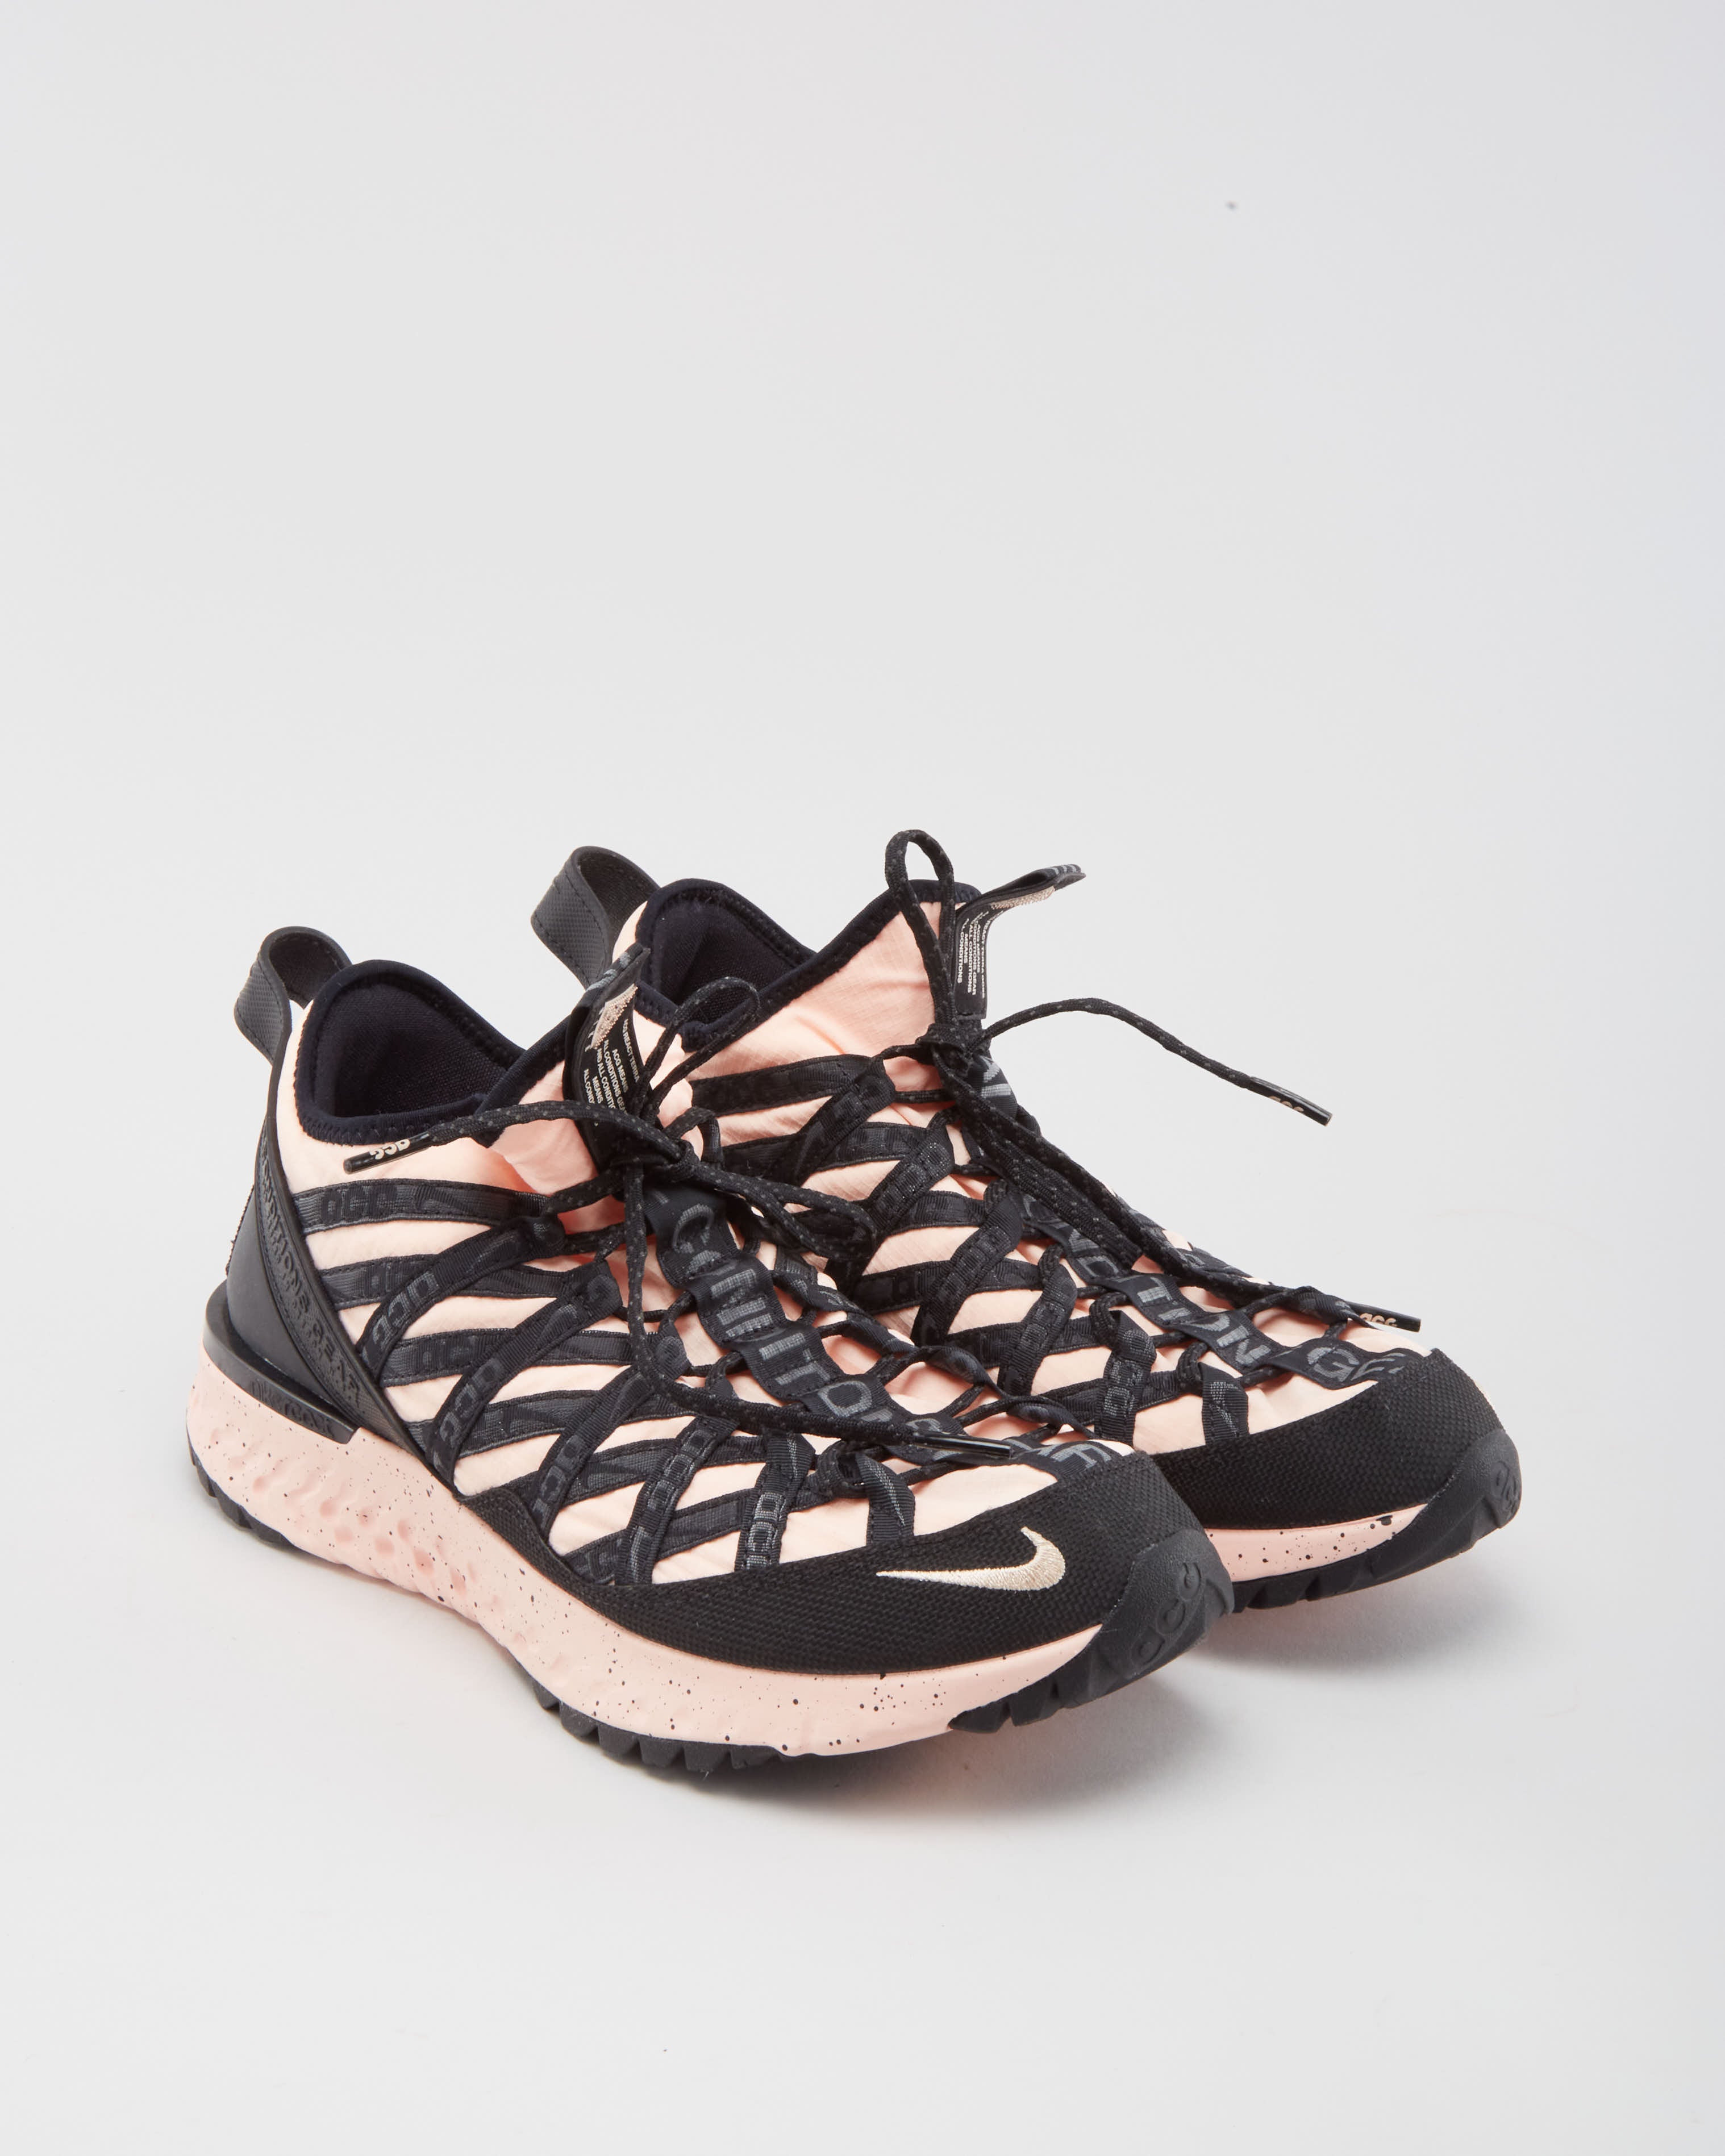 Nike ACG Terra Gobe Pink / Black All Conditions Gear Trainers - UK8